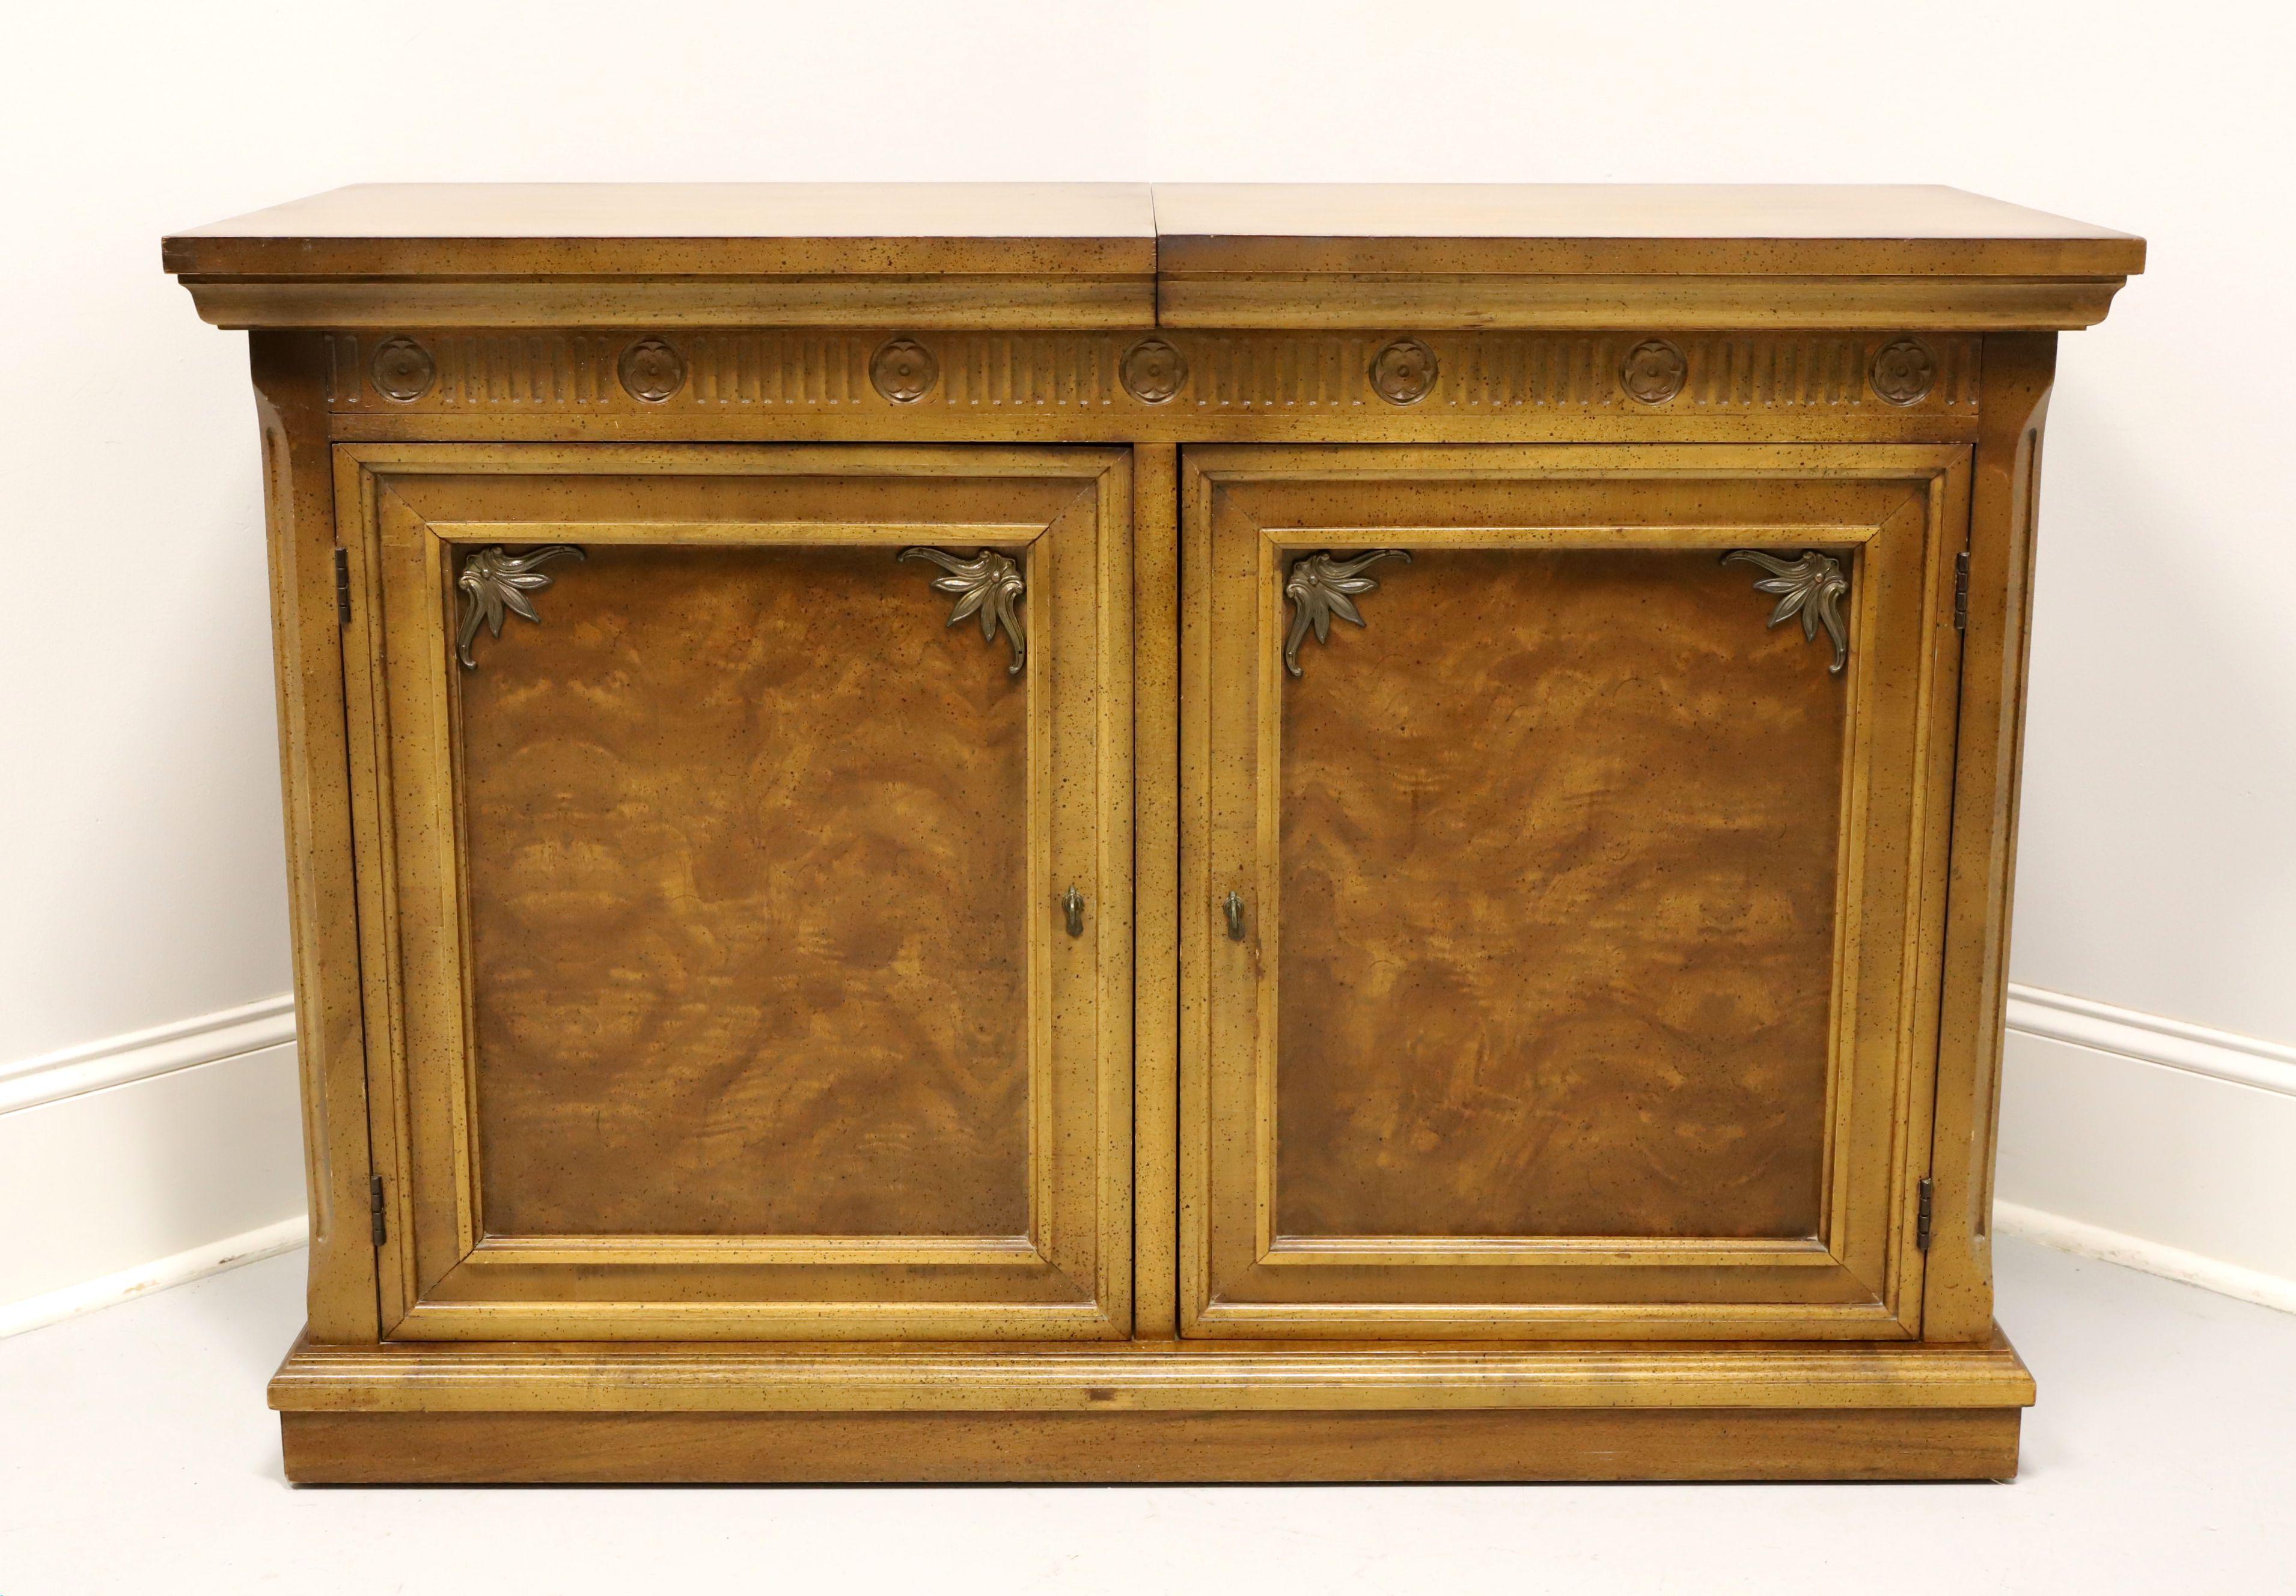 A Neoclassical style server, unbranded, similar in quality to Thomasville or Tomlinson. Pecan, or similar nutwood, recessed door panels with wood grain detail & brass accents, brass hardware and hard composite surface under slide out top. Features